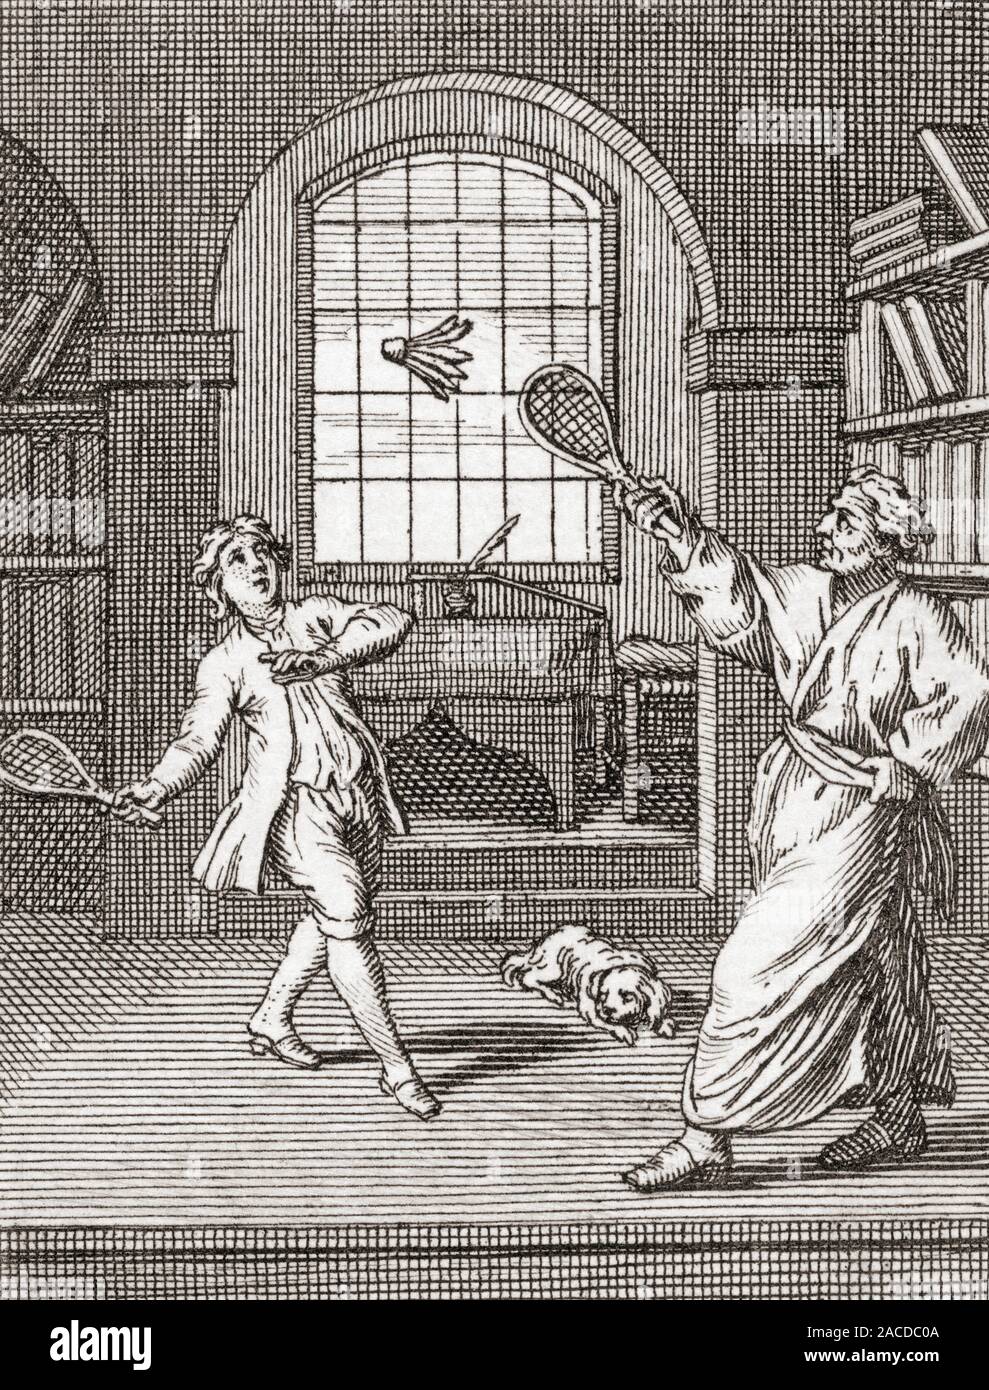 Teacher and student playing badminton.  After an 18th century work. Stock Photo